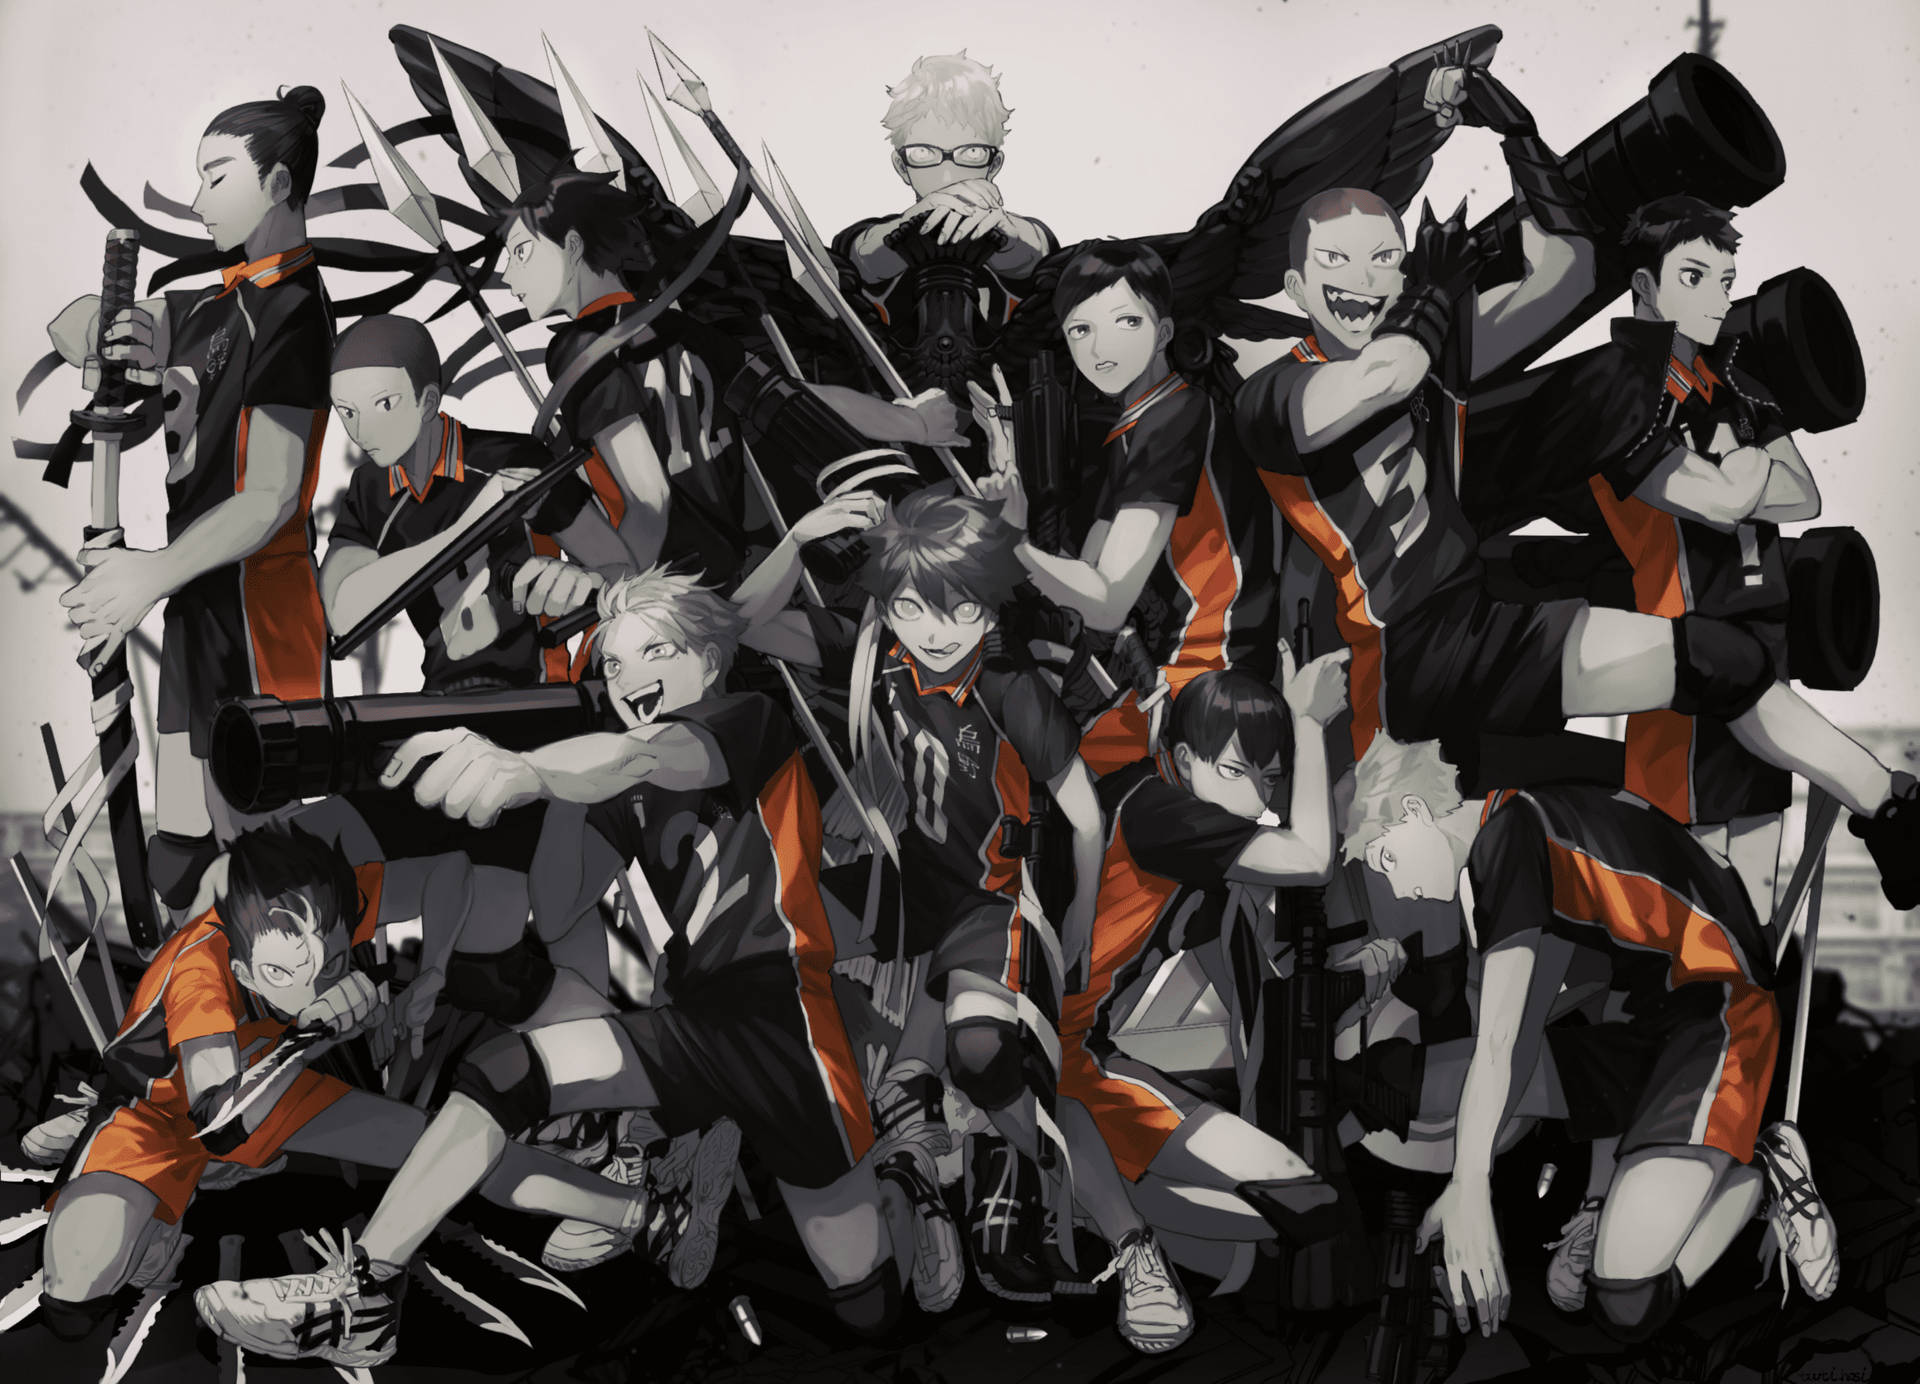 Haikyuu Teams Holding Weapons Background